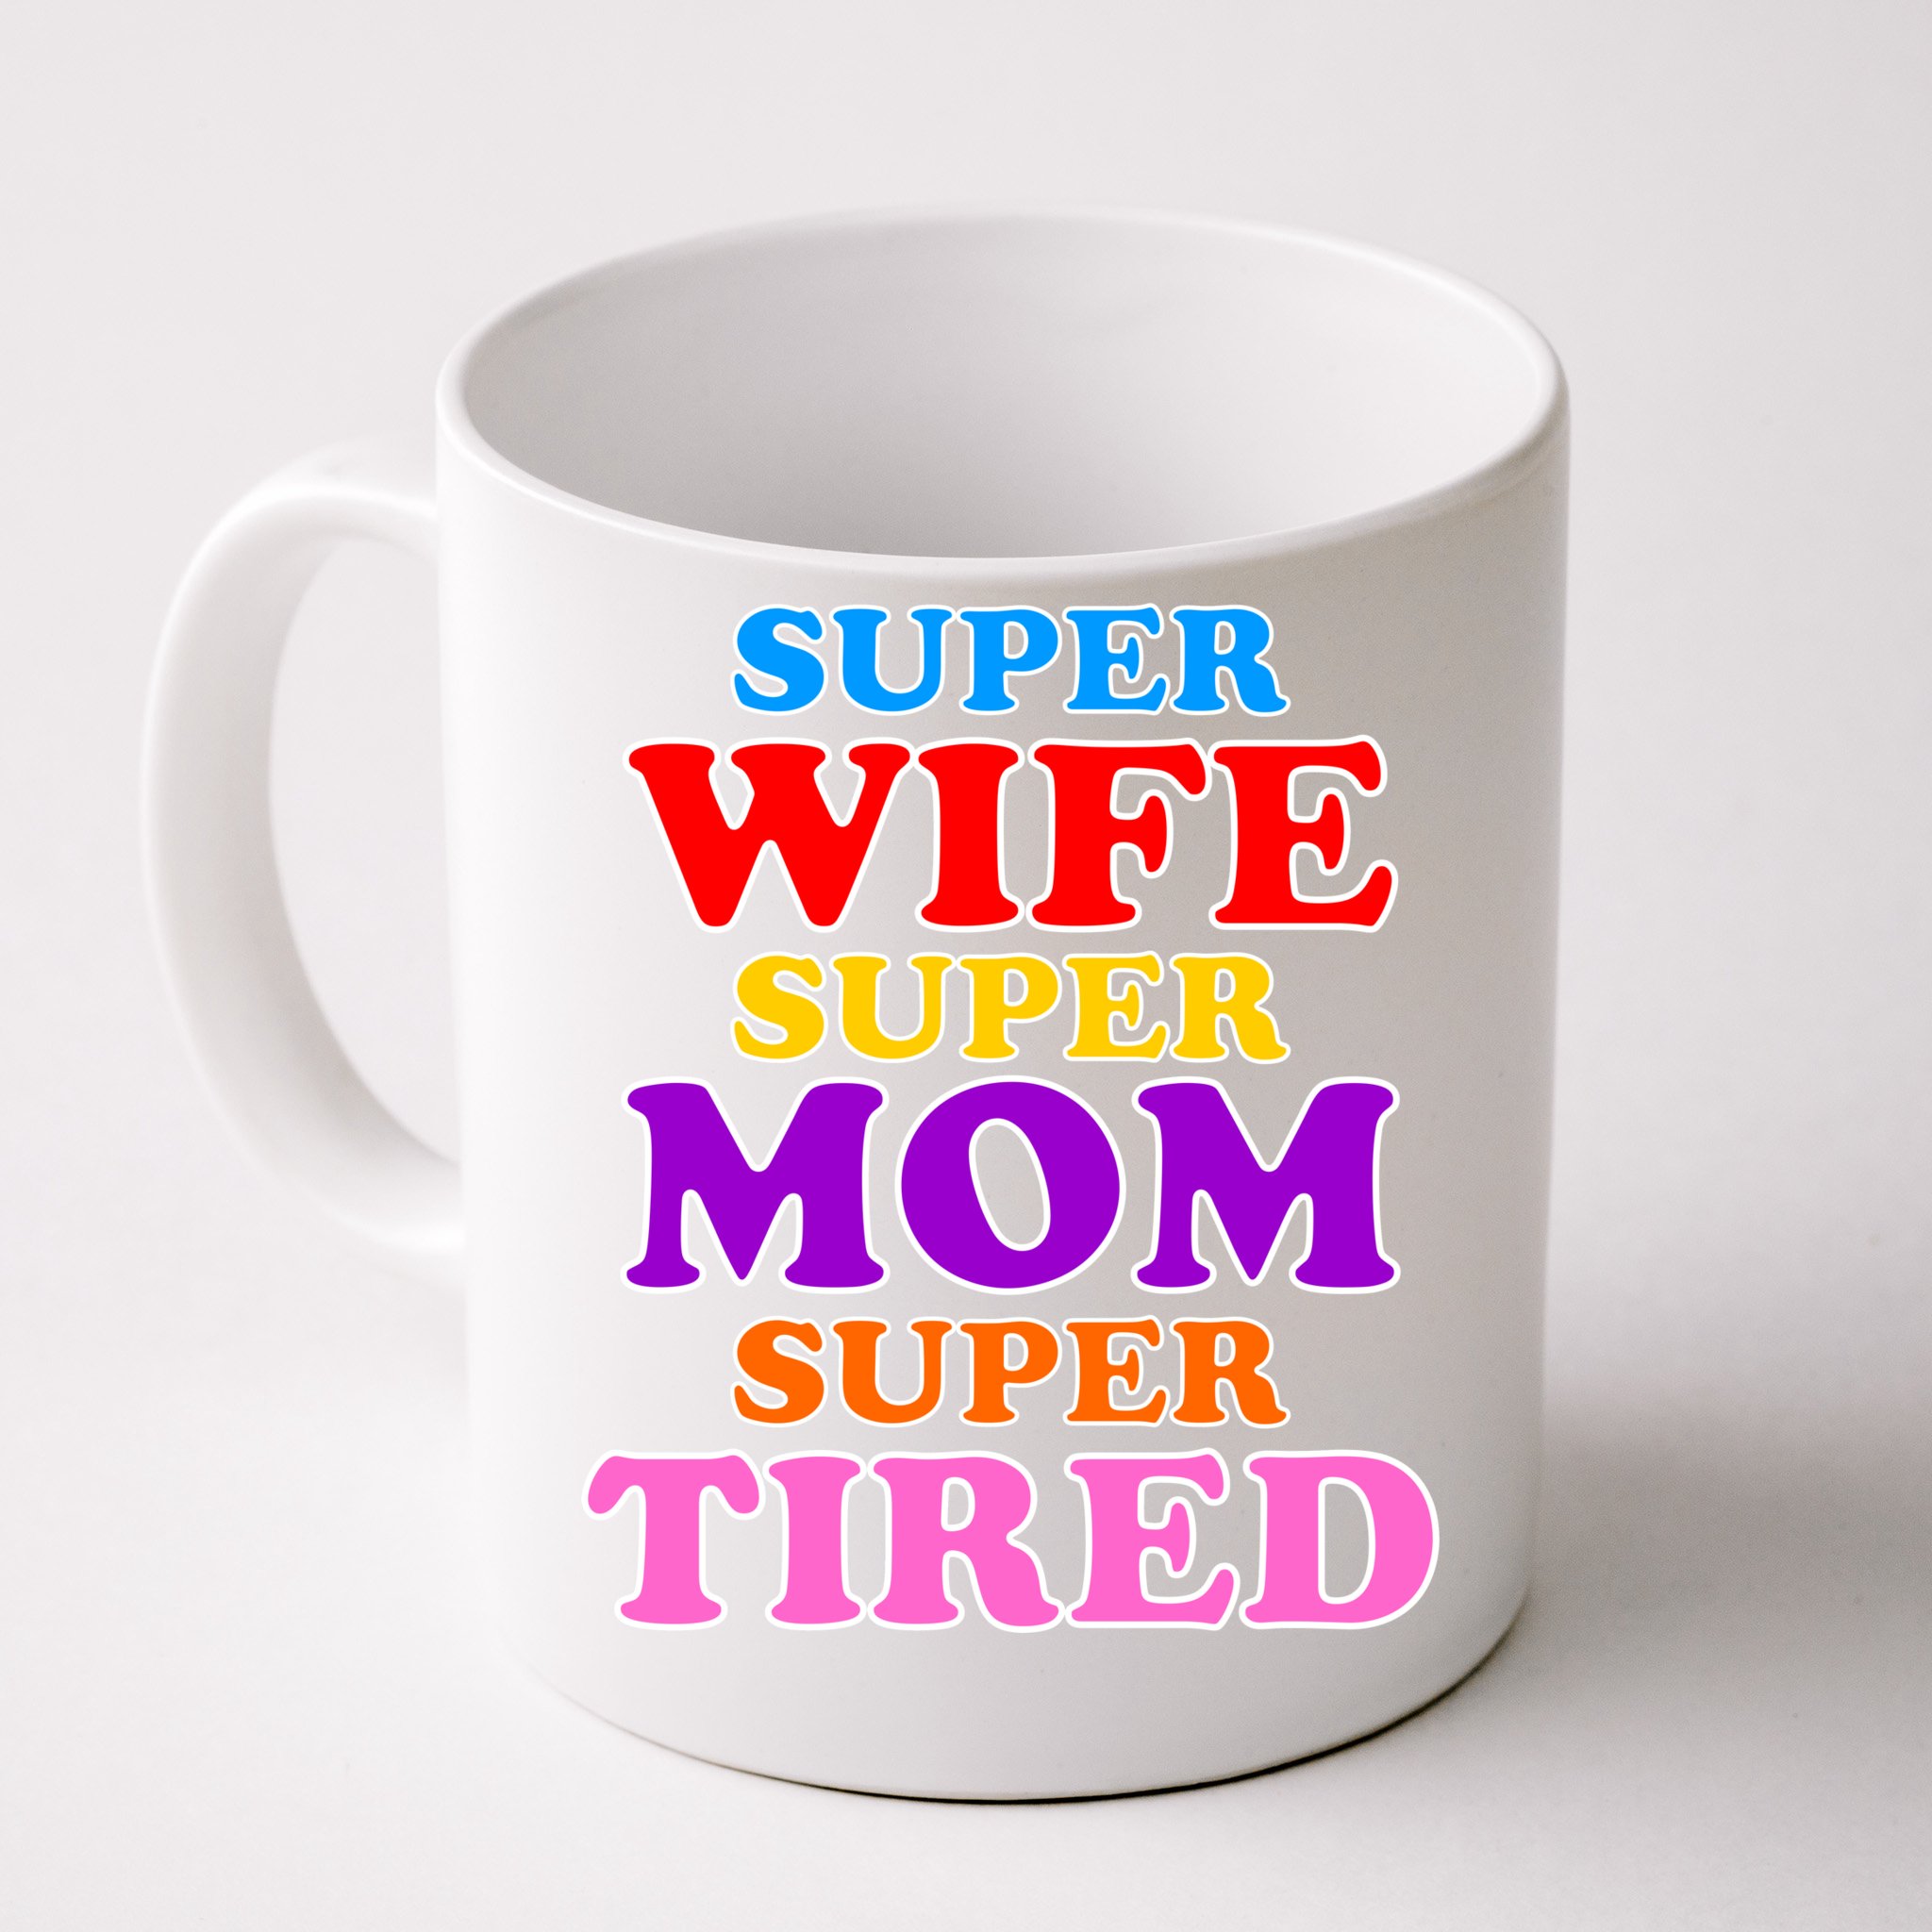 https://images3.teeshirtpalace.com/images/productImages/super-wife-super-mom-super-tired-colorful-text--white-cfm-front.jpg